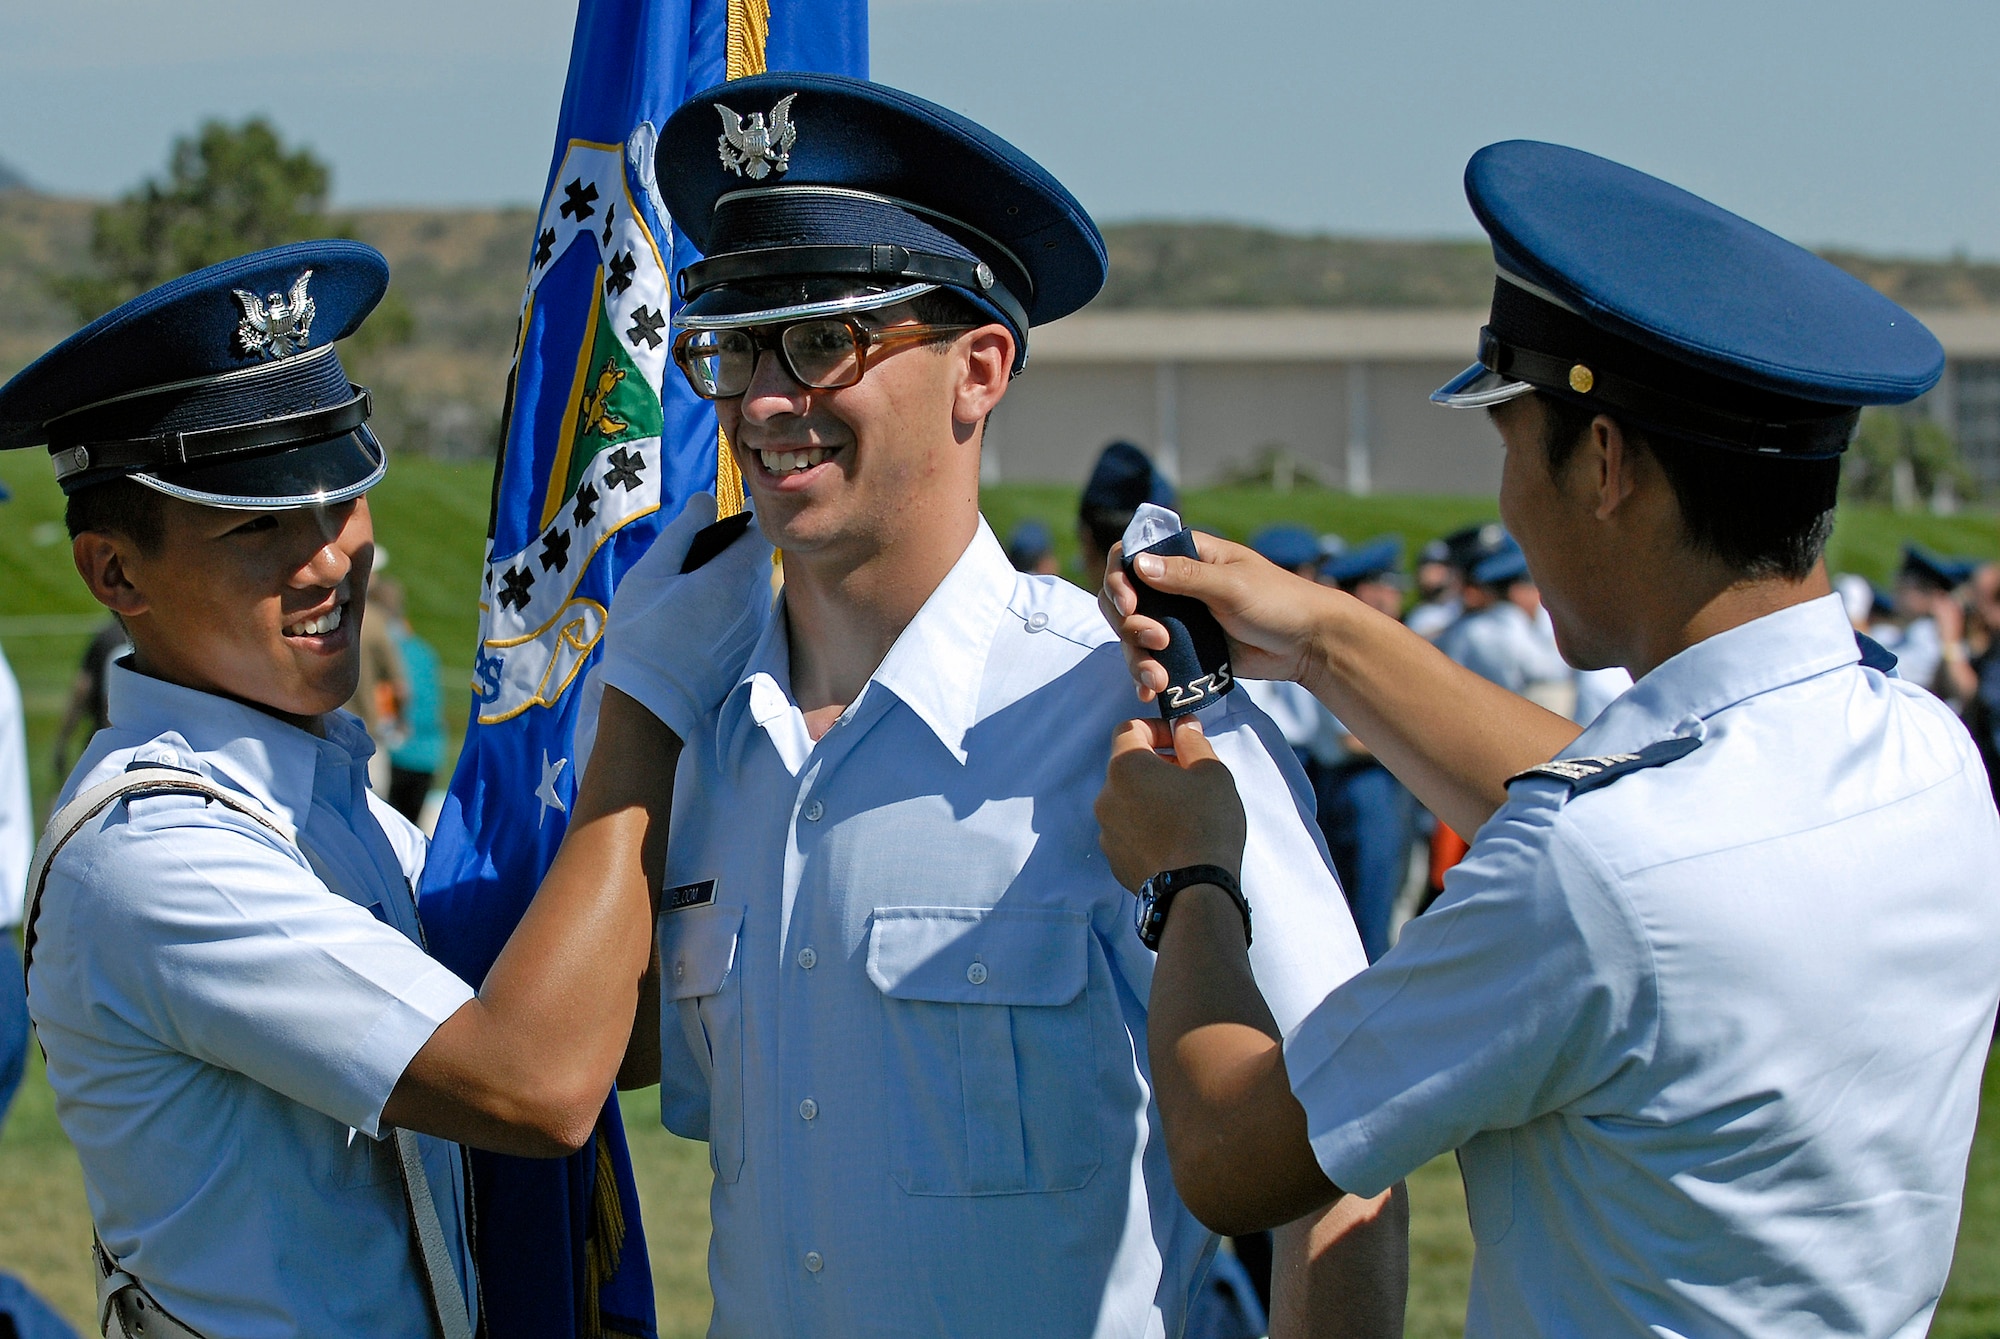 U. S. Air Force Academy Cadet 4th Class Louis Bloom receives his shoulder boards from squadron 38 upper classmen Aug 6 after the Acceptance Day Parade held on the Stillman Parade Feld at the U.S. Air Force Academy in Colorado. (U.S Air Force photo/Mike Kaplan)